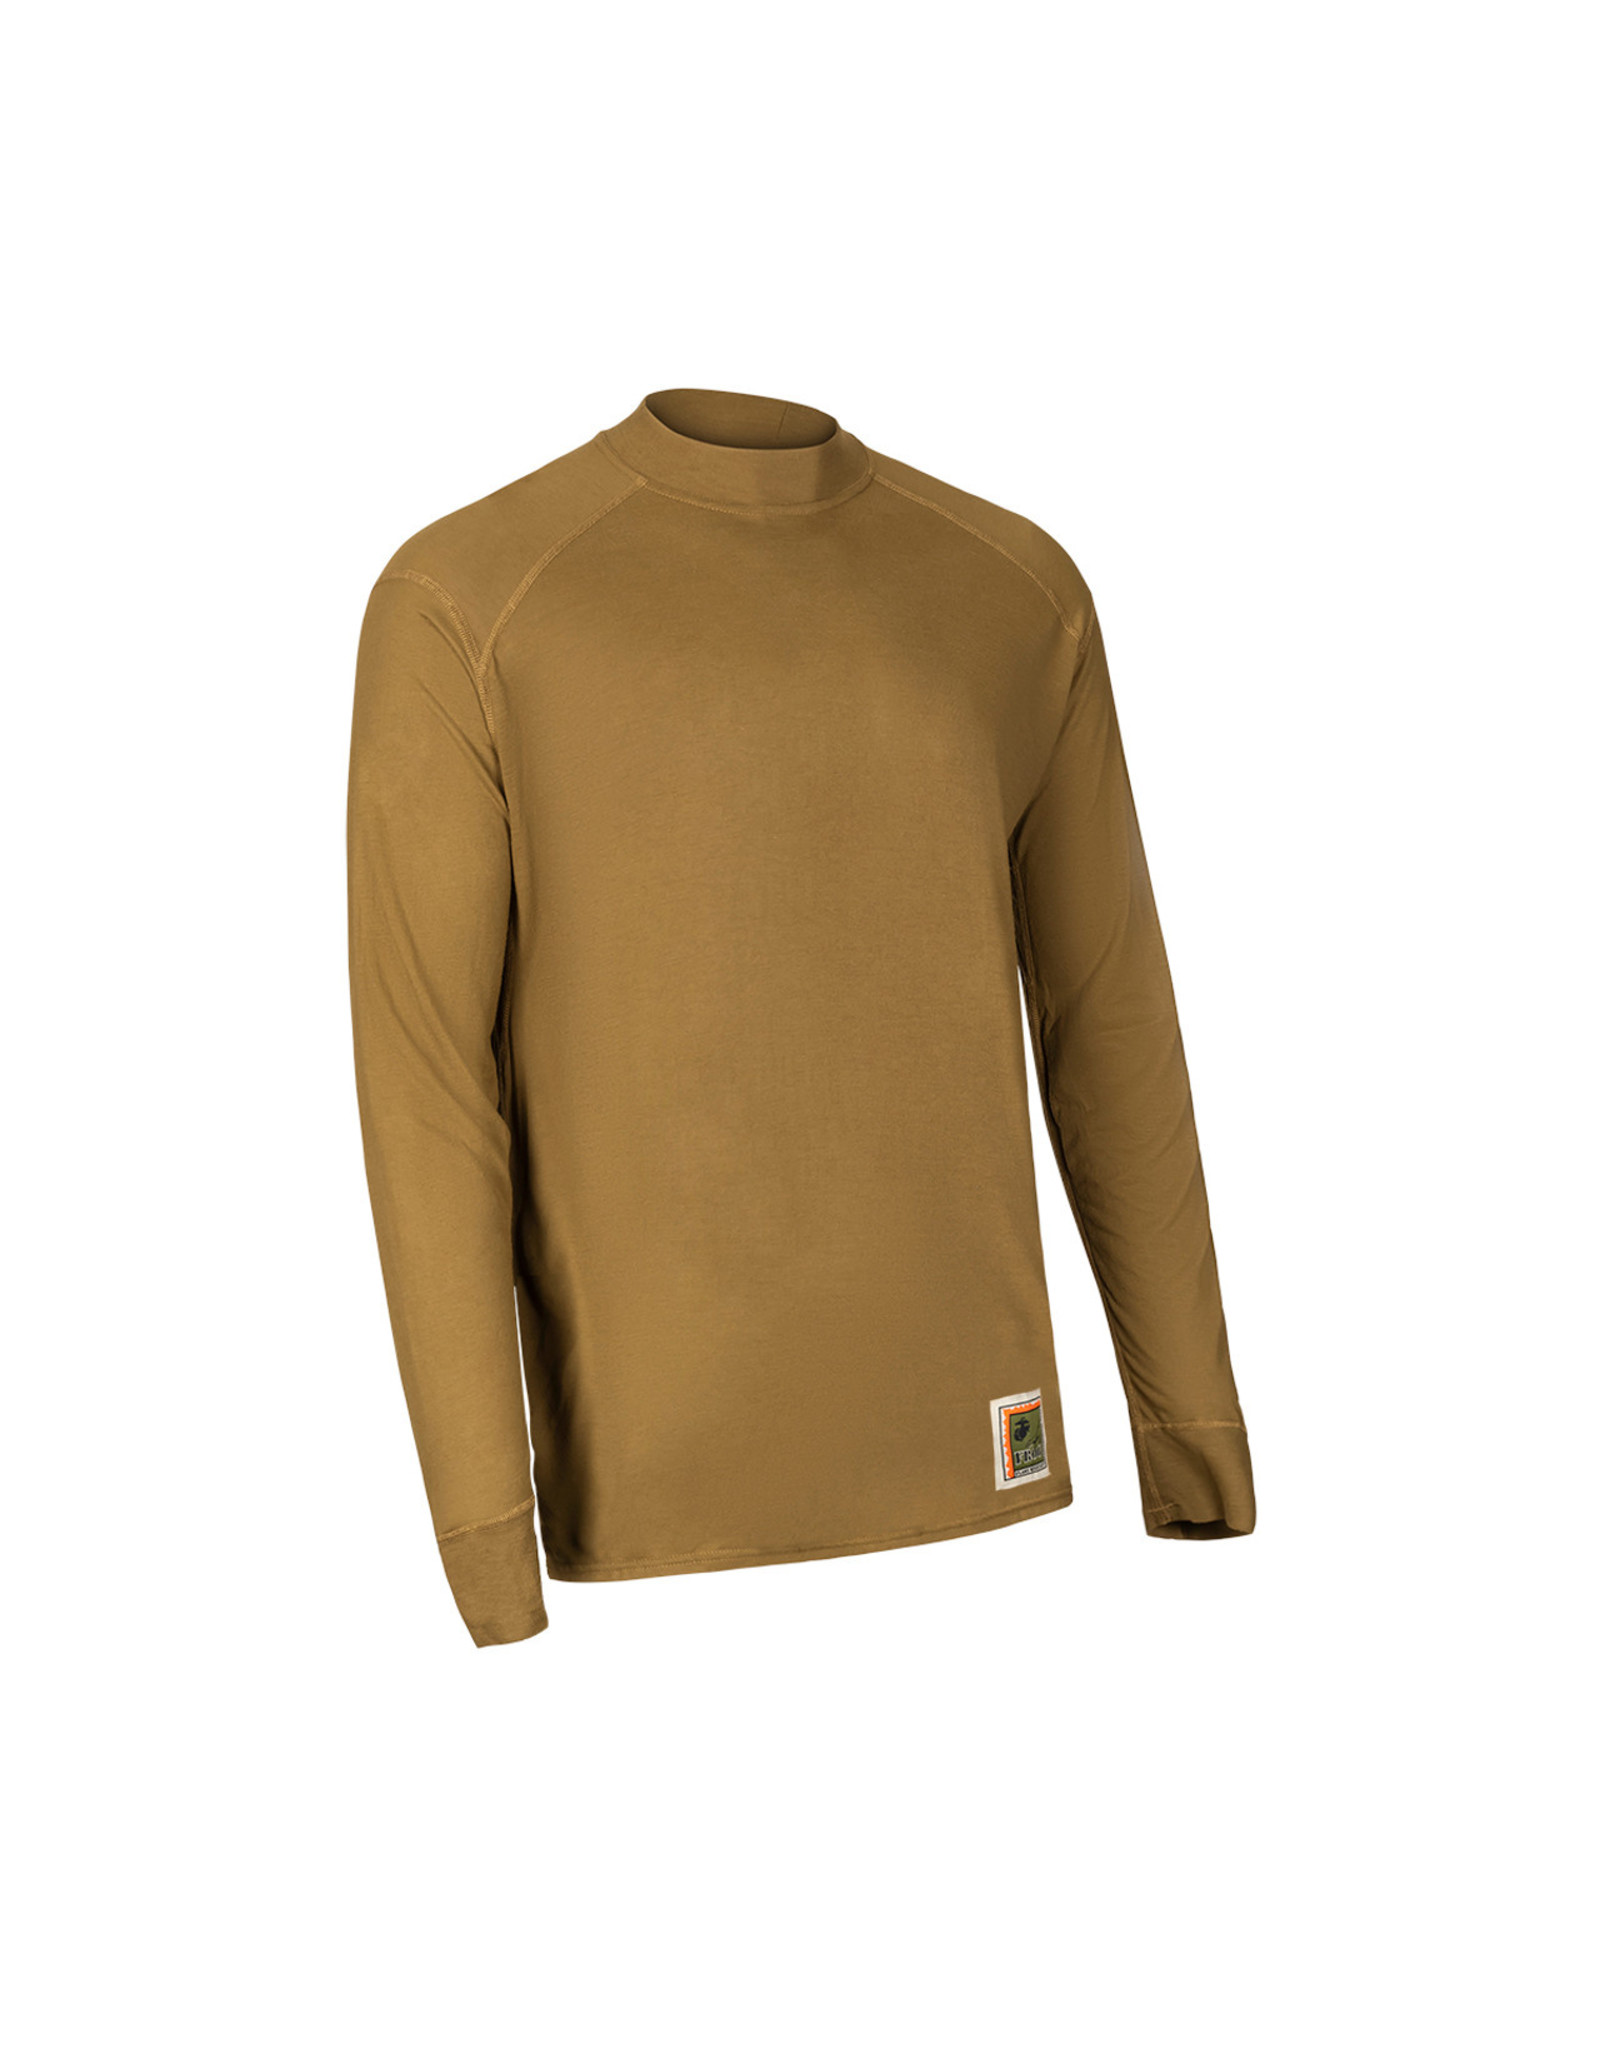 Buy Baselayer  Branded Baselayer for Sale - Just Keepers